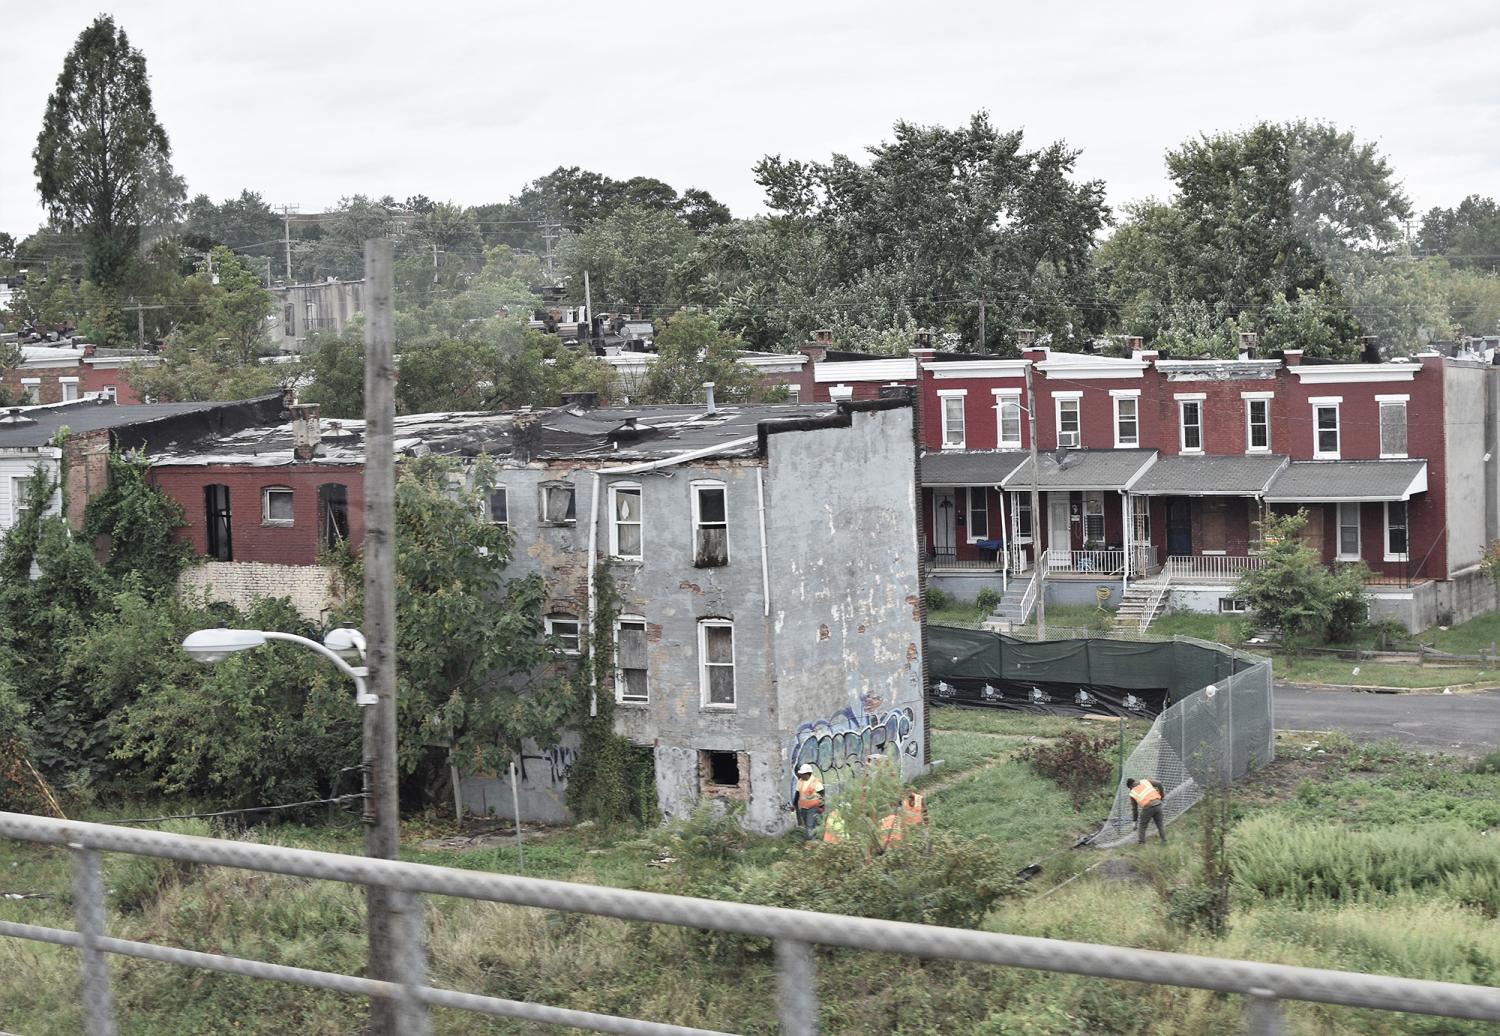 September 2019, Baltimore, Maryland - Suburbs of Baltimore like Cherry Hill as seen from tranm line show the extent of inner city poverty in USA with houses in dire condition